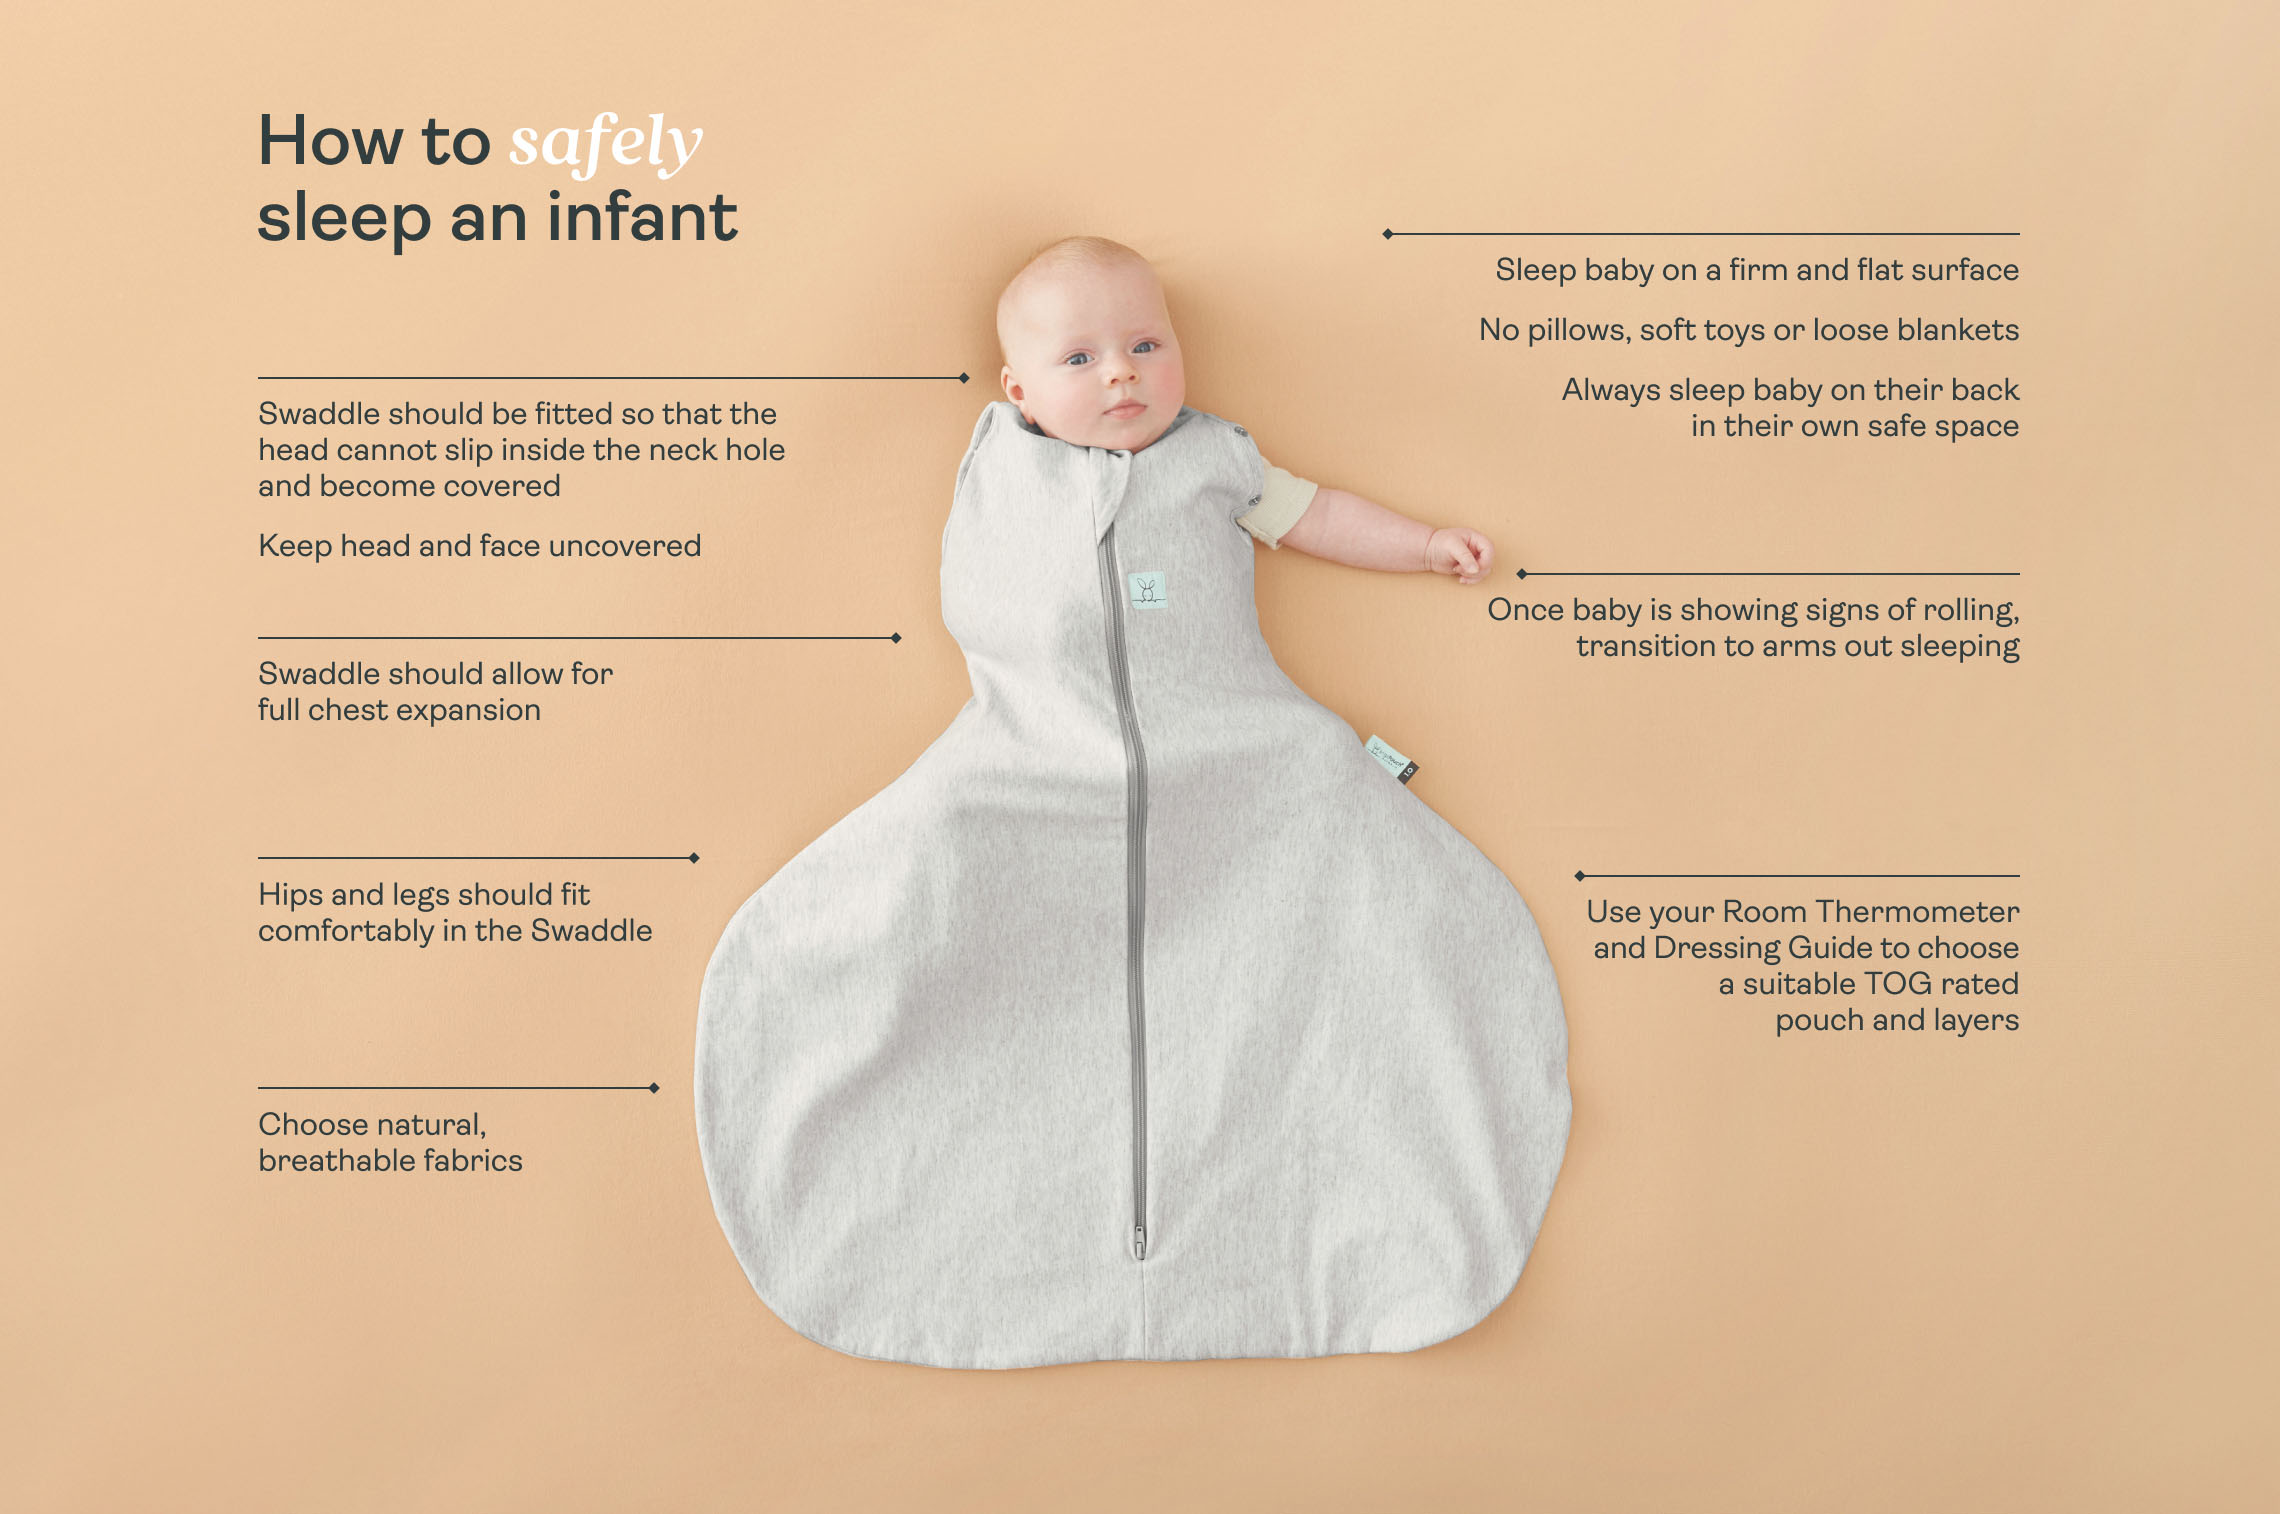 How to safely sleep a baby with hip dysplasia